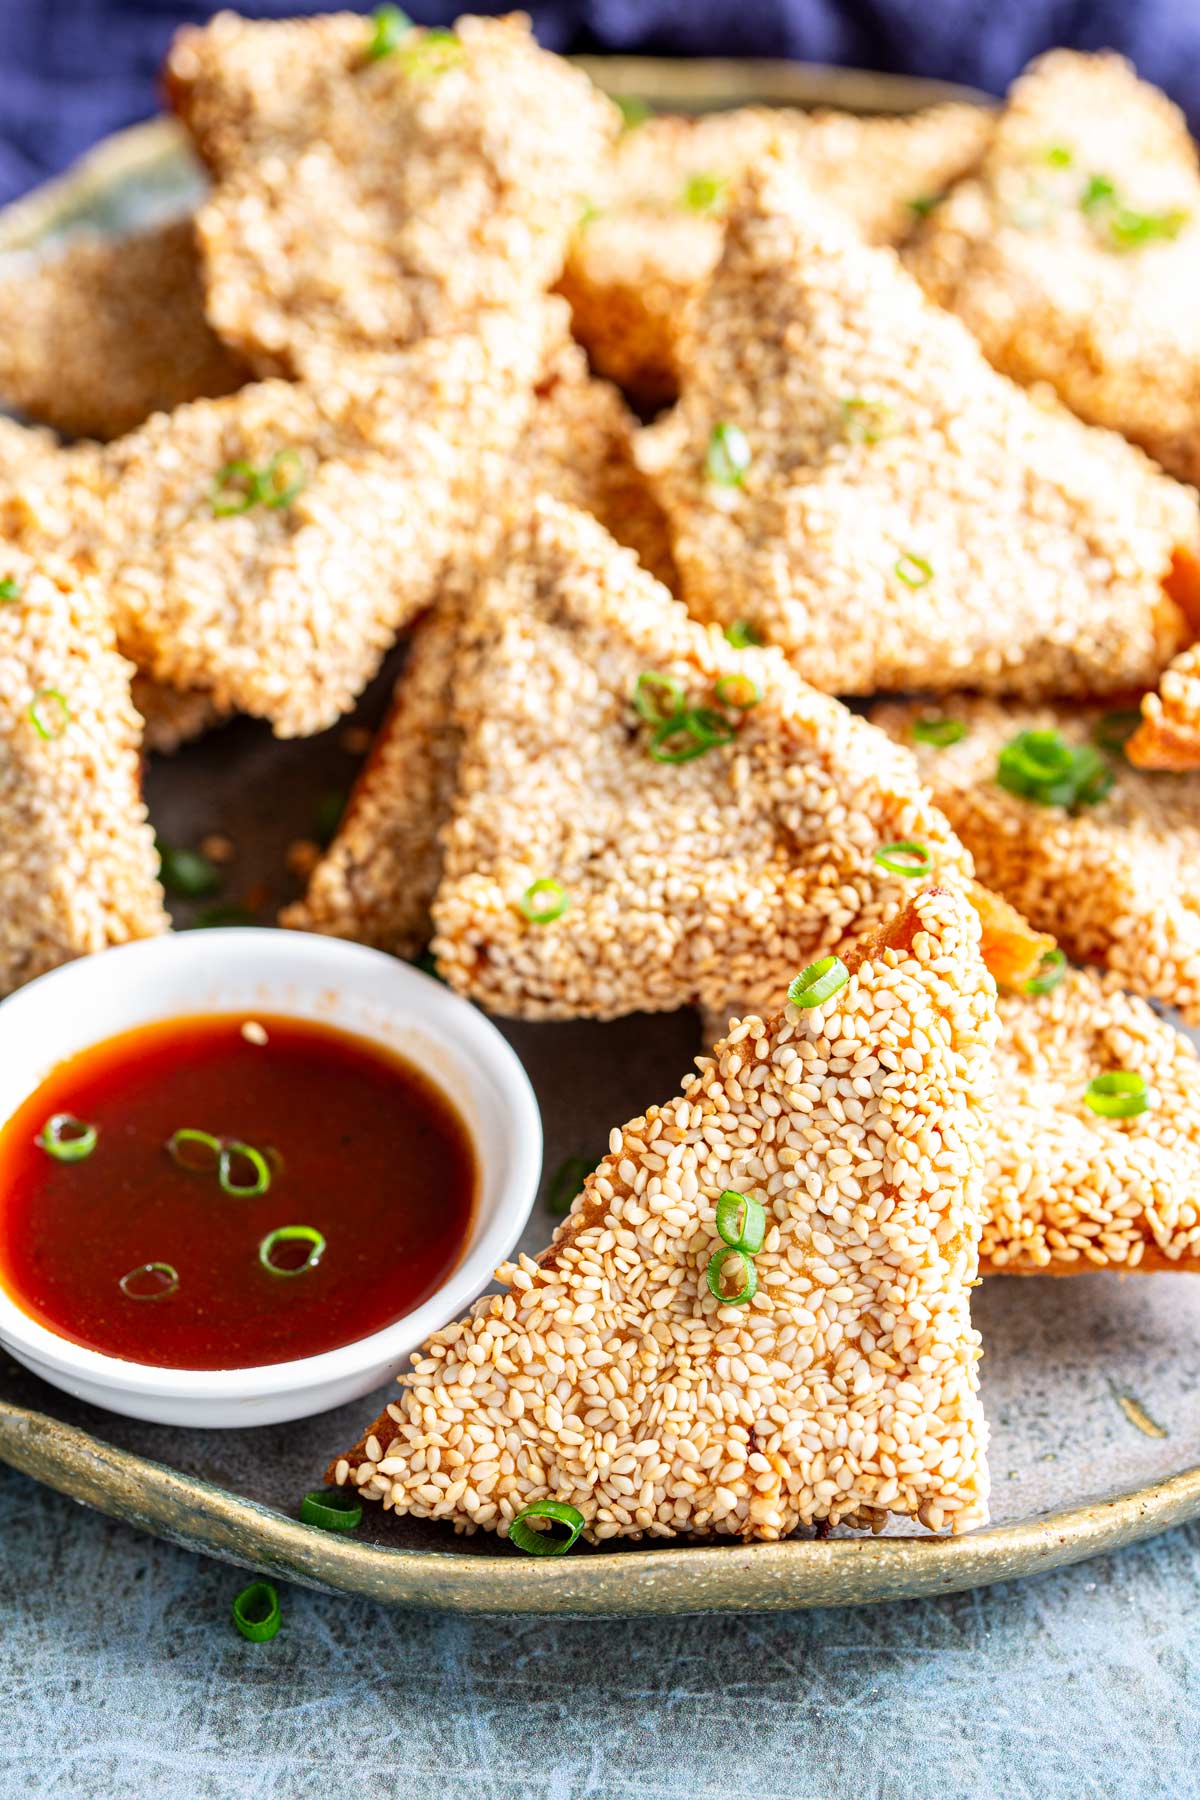 a plate of fired sesame coated triangles on a rustic blue plate